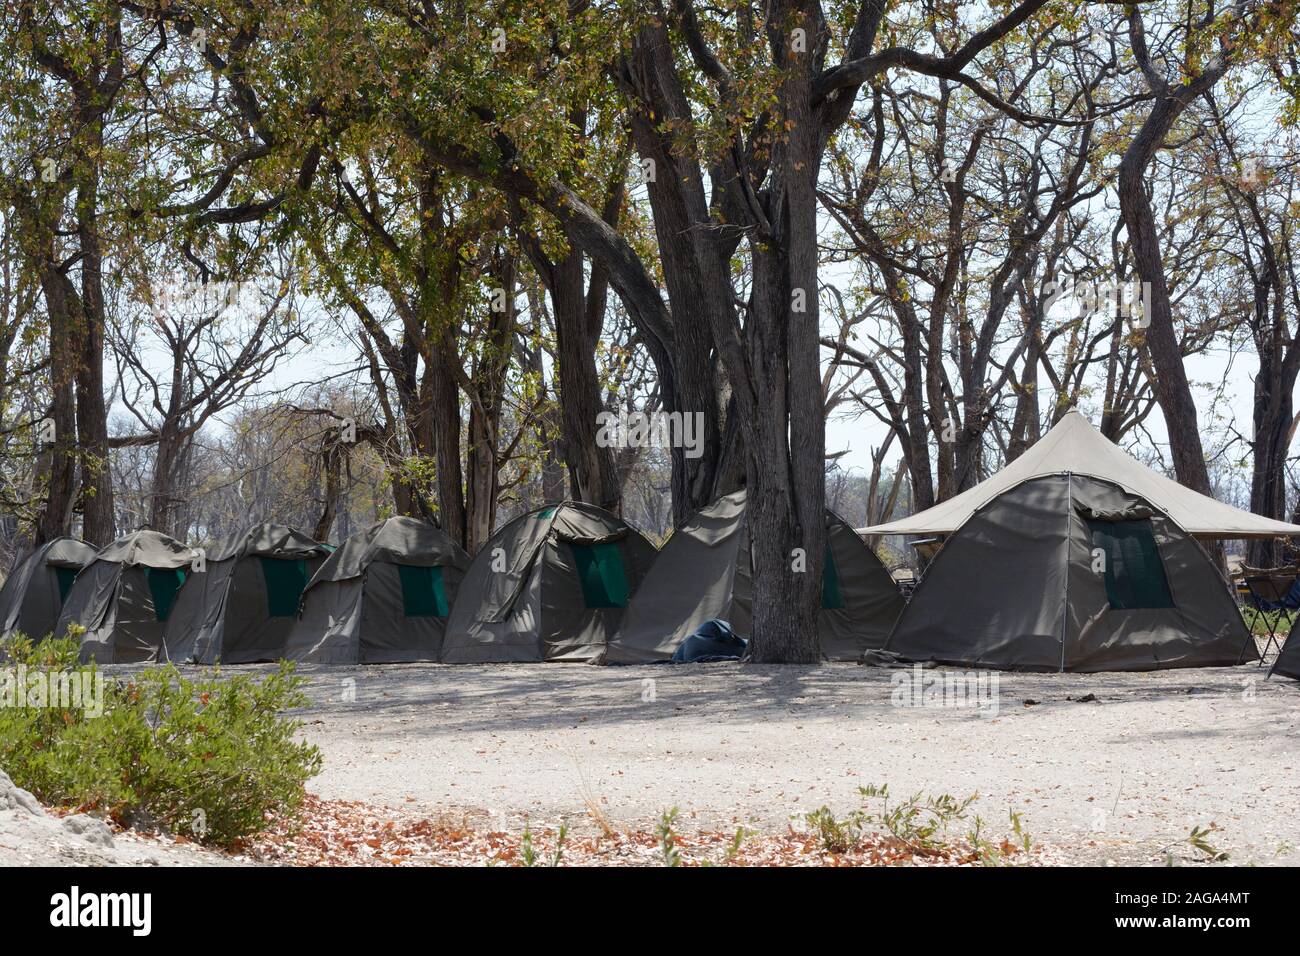 Row of tents for simple camping holiday Moremi National park Botswana Africa Stock Photo